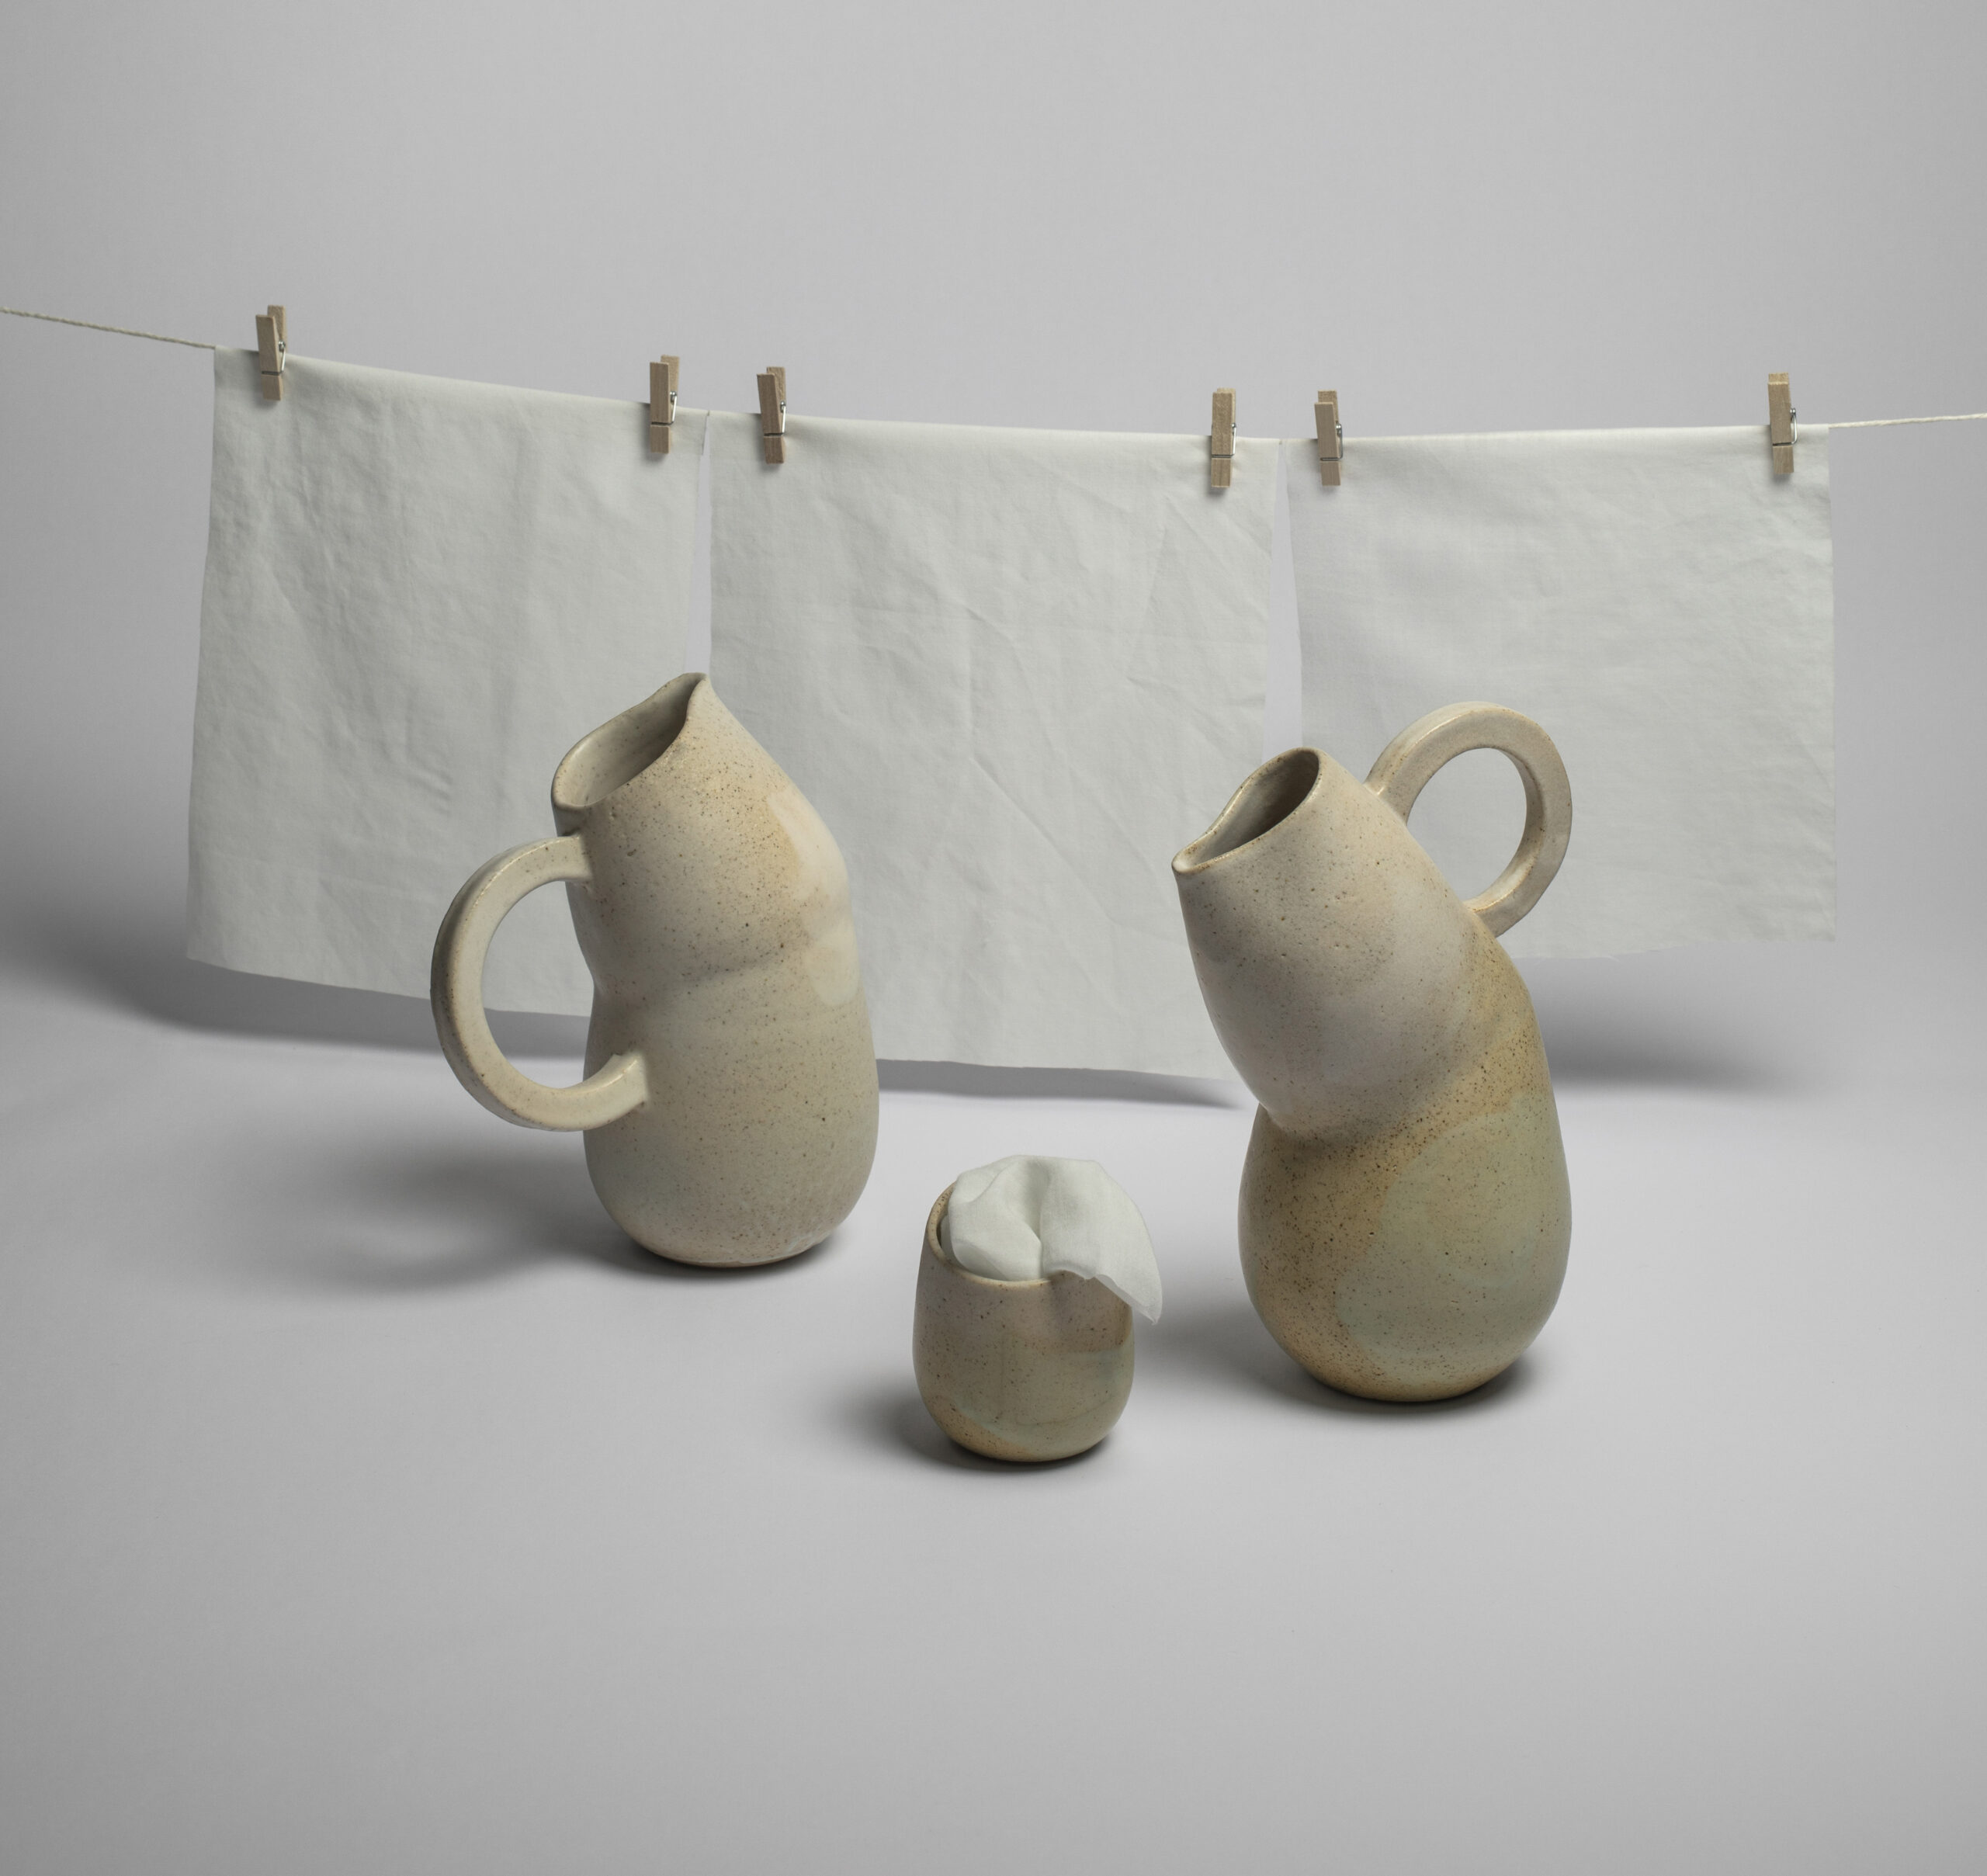 ANA ILLUECA: Pottery with Mediterranean Stories Transcending their Physical Limits